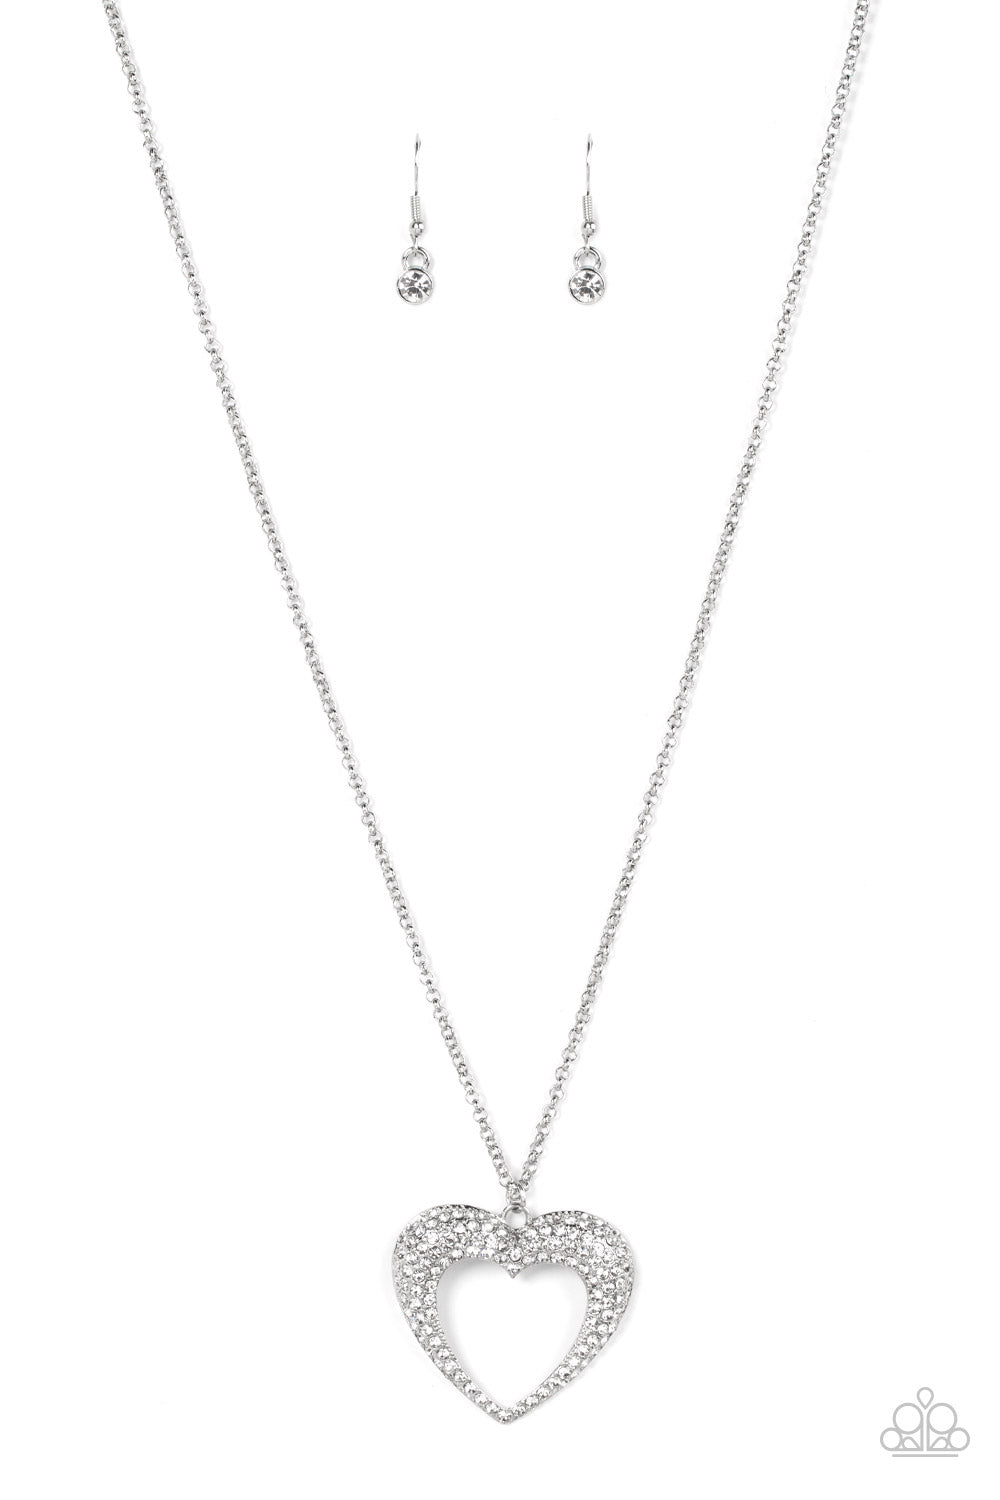 Paparazzi Cupid Charisma - White Necklace - A Finishing Touch Jewelry